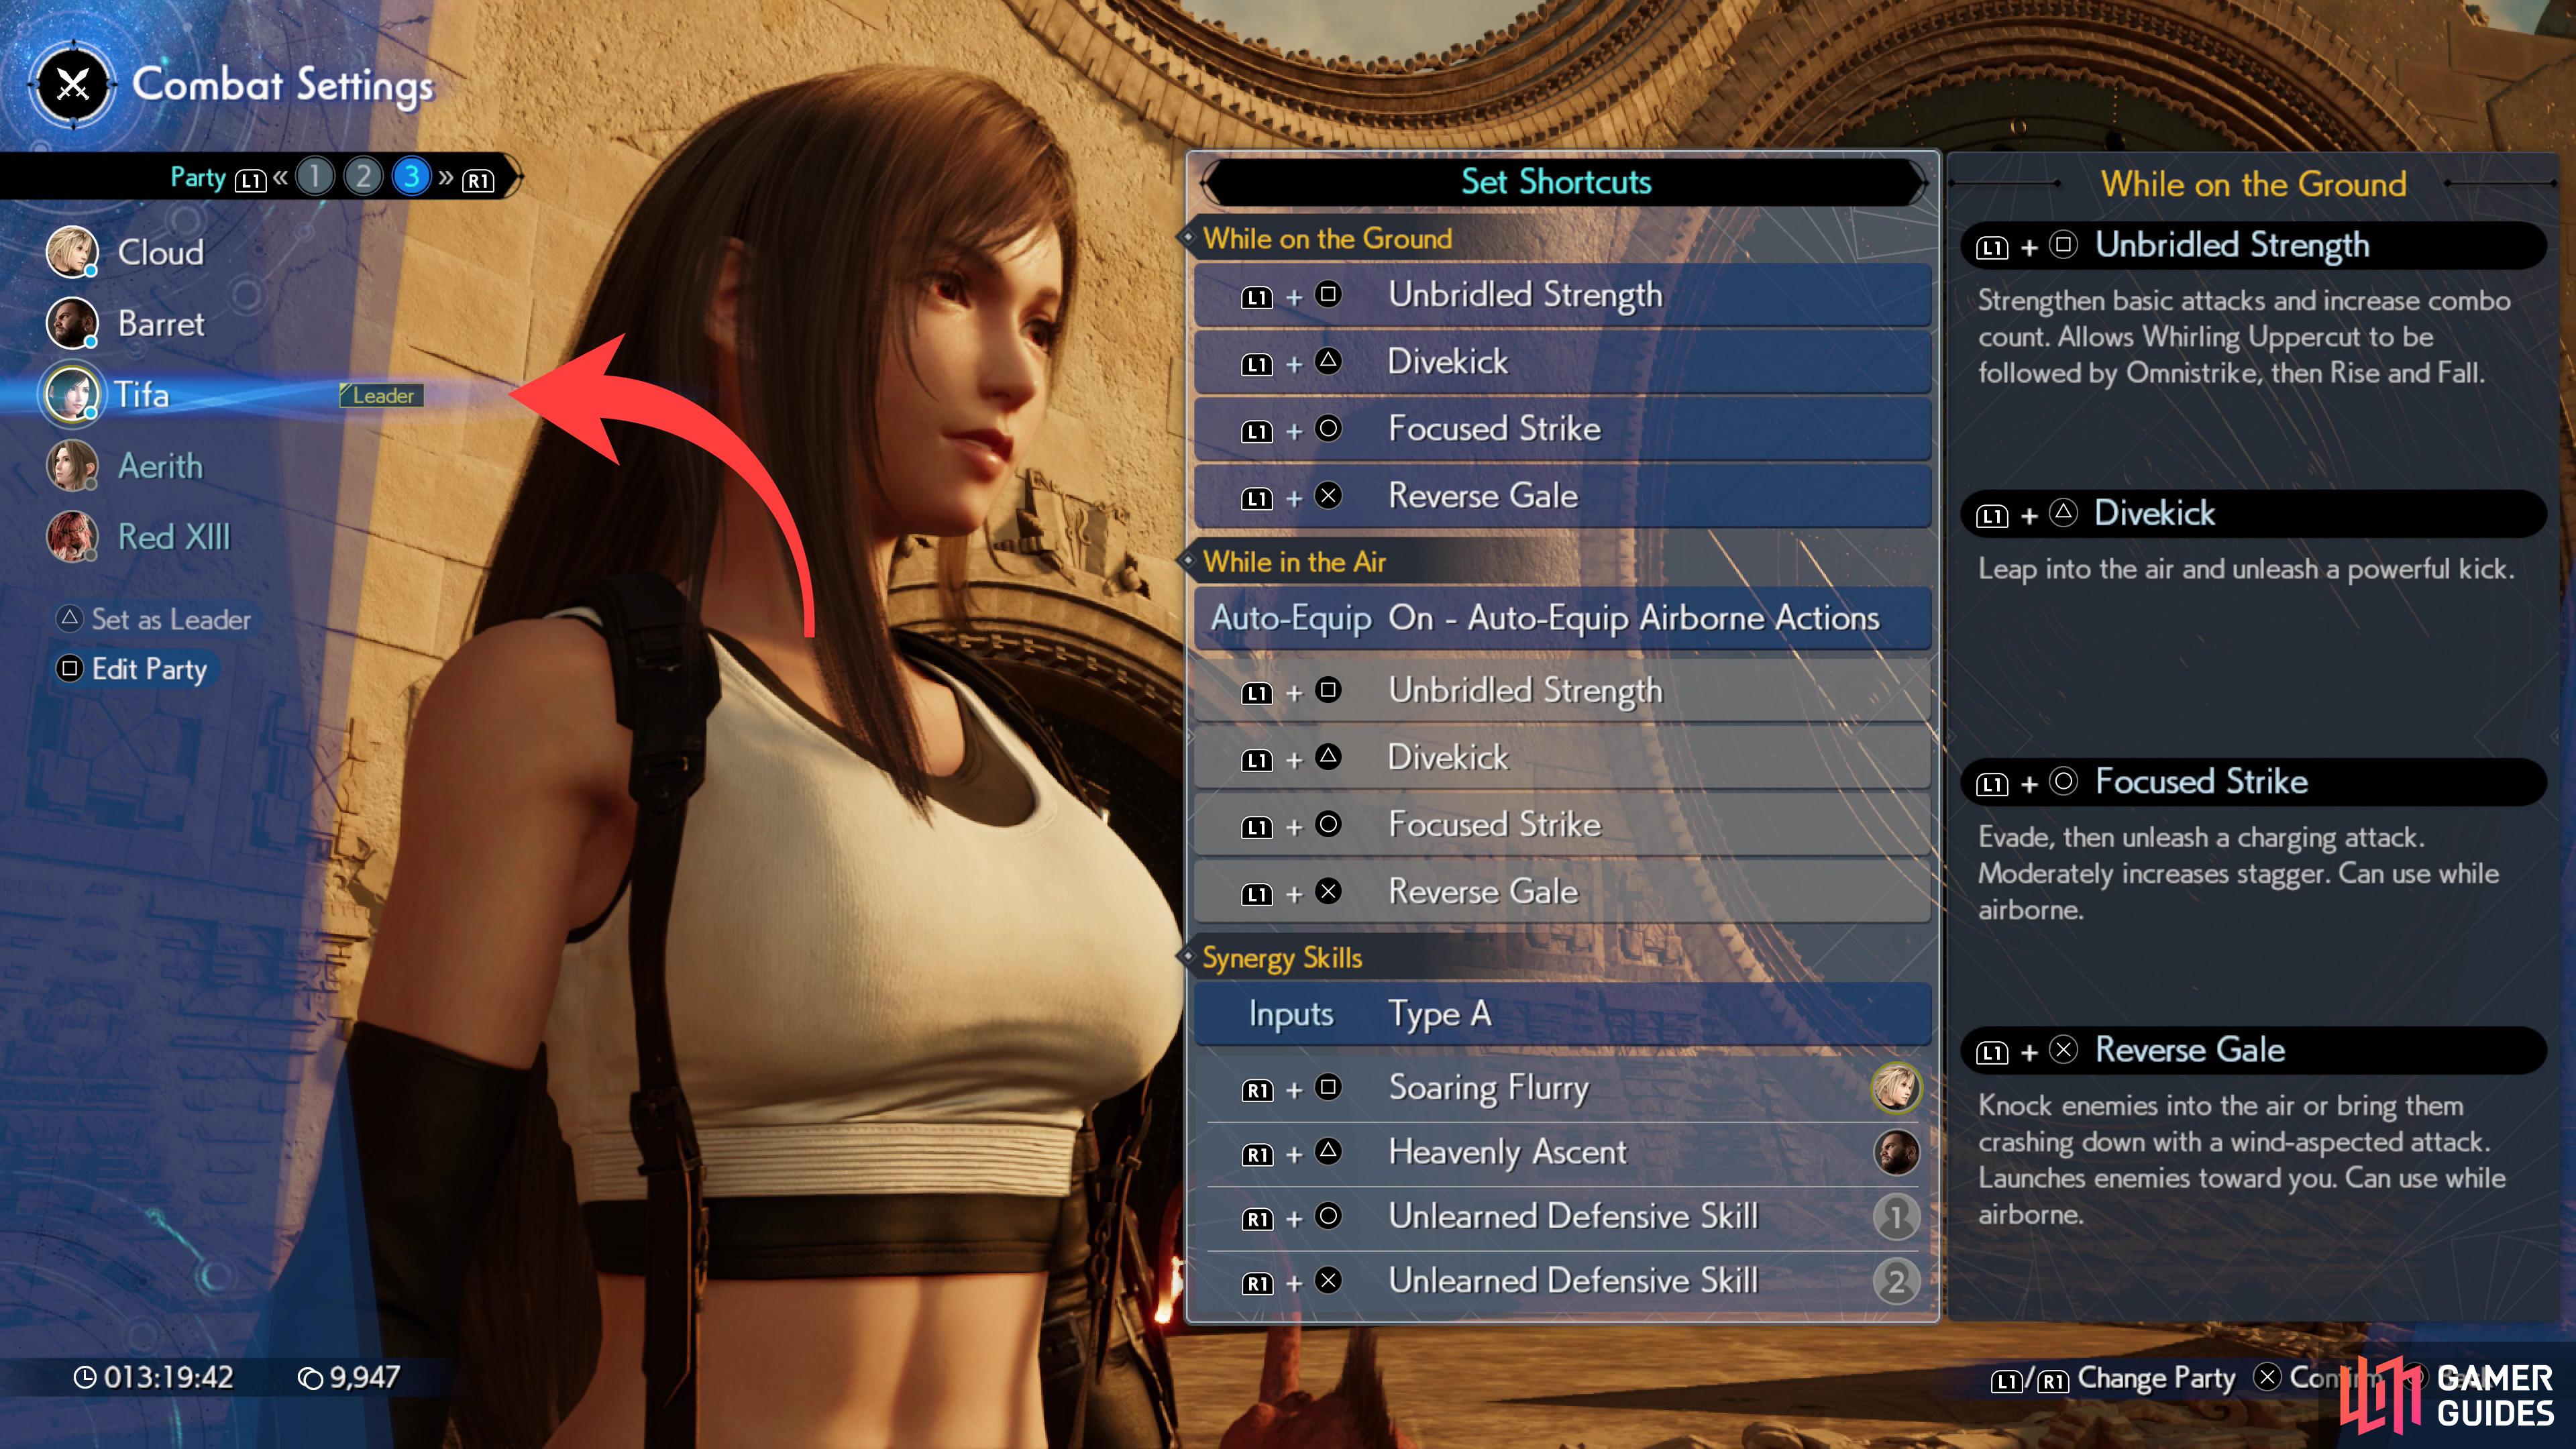 You can set the Party Leader in the Combat Settings menu, which will determine who you begin combat controlling.